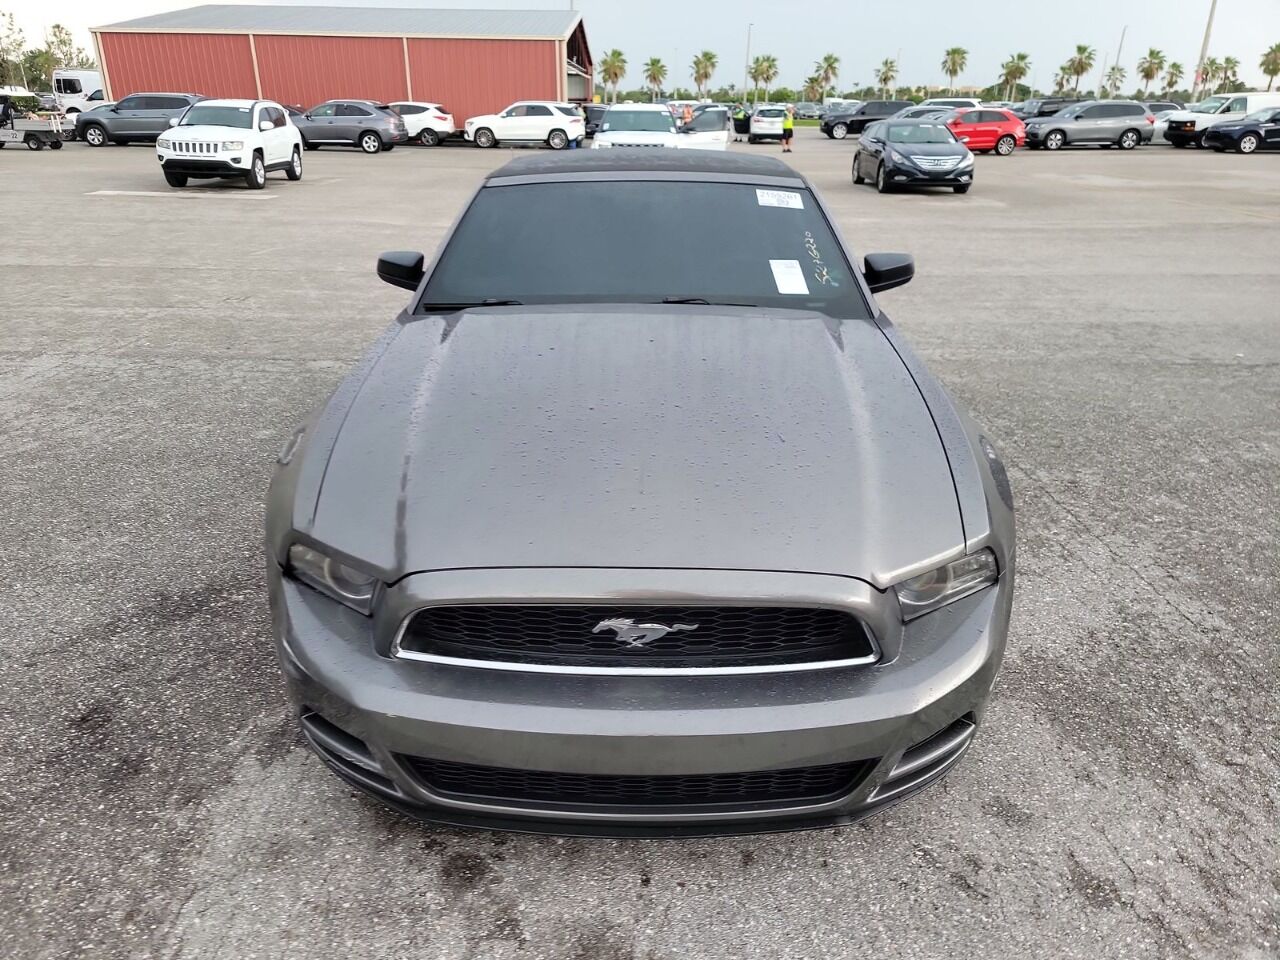 2014 FORD Mustang Convertible - $6,495